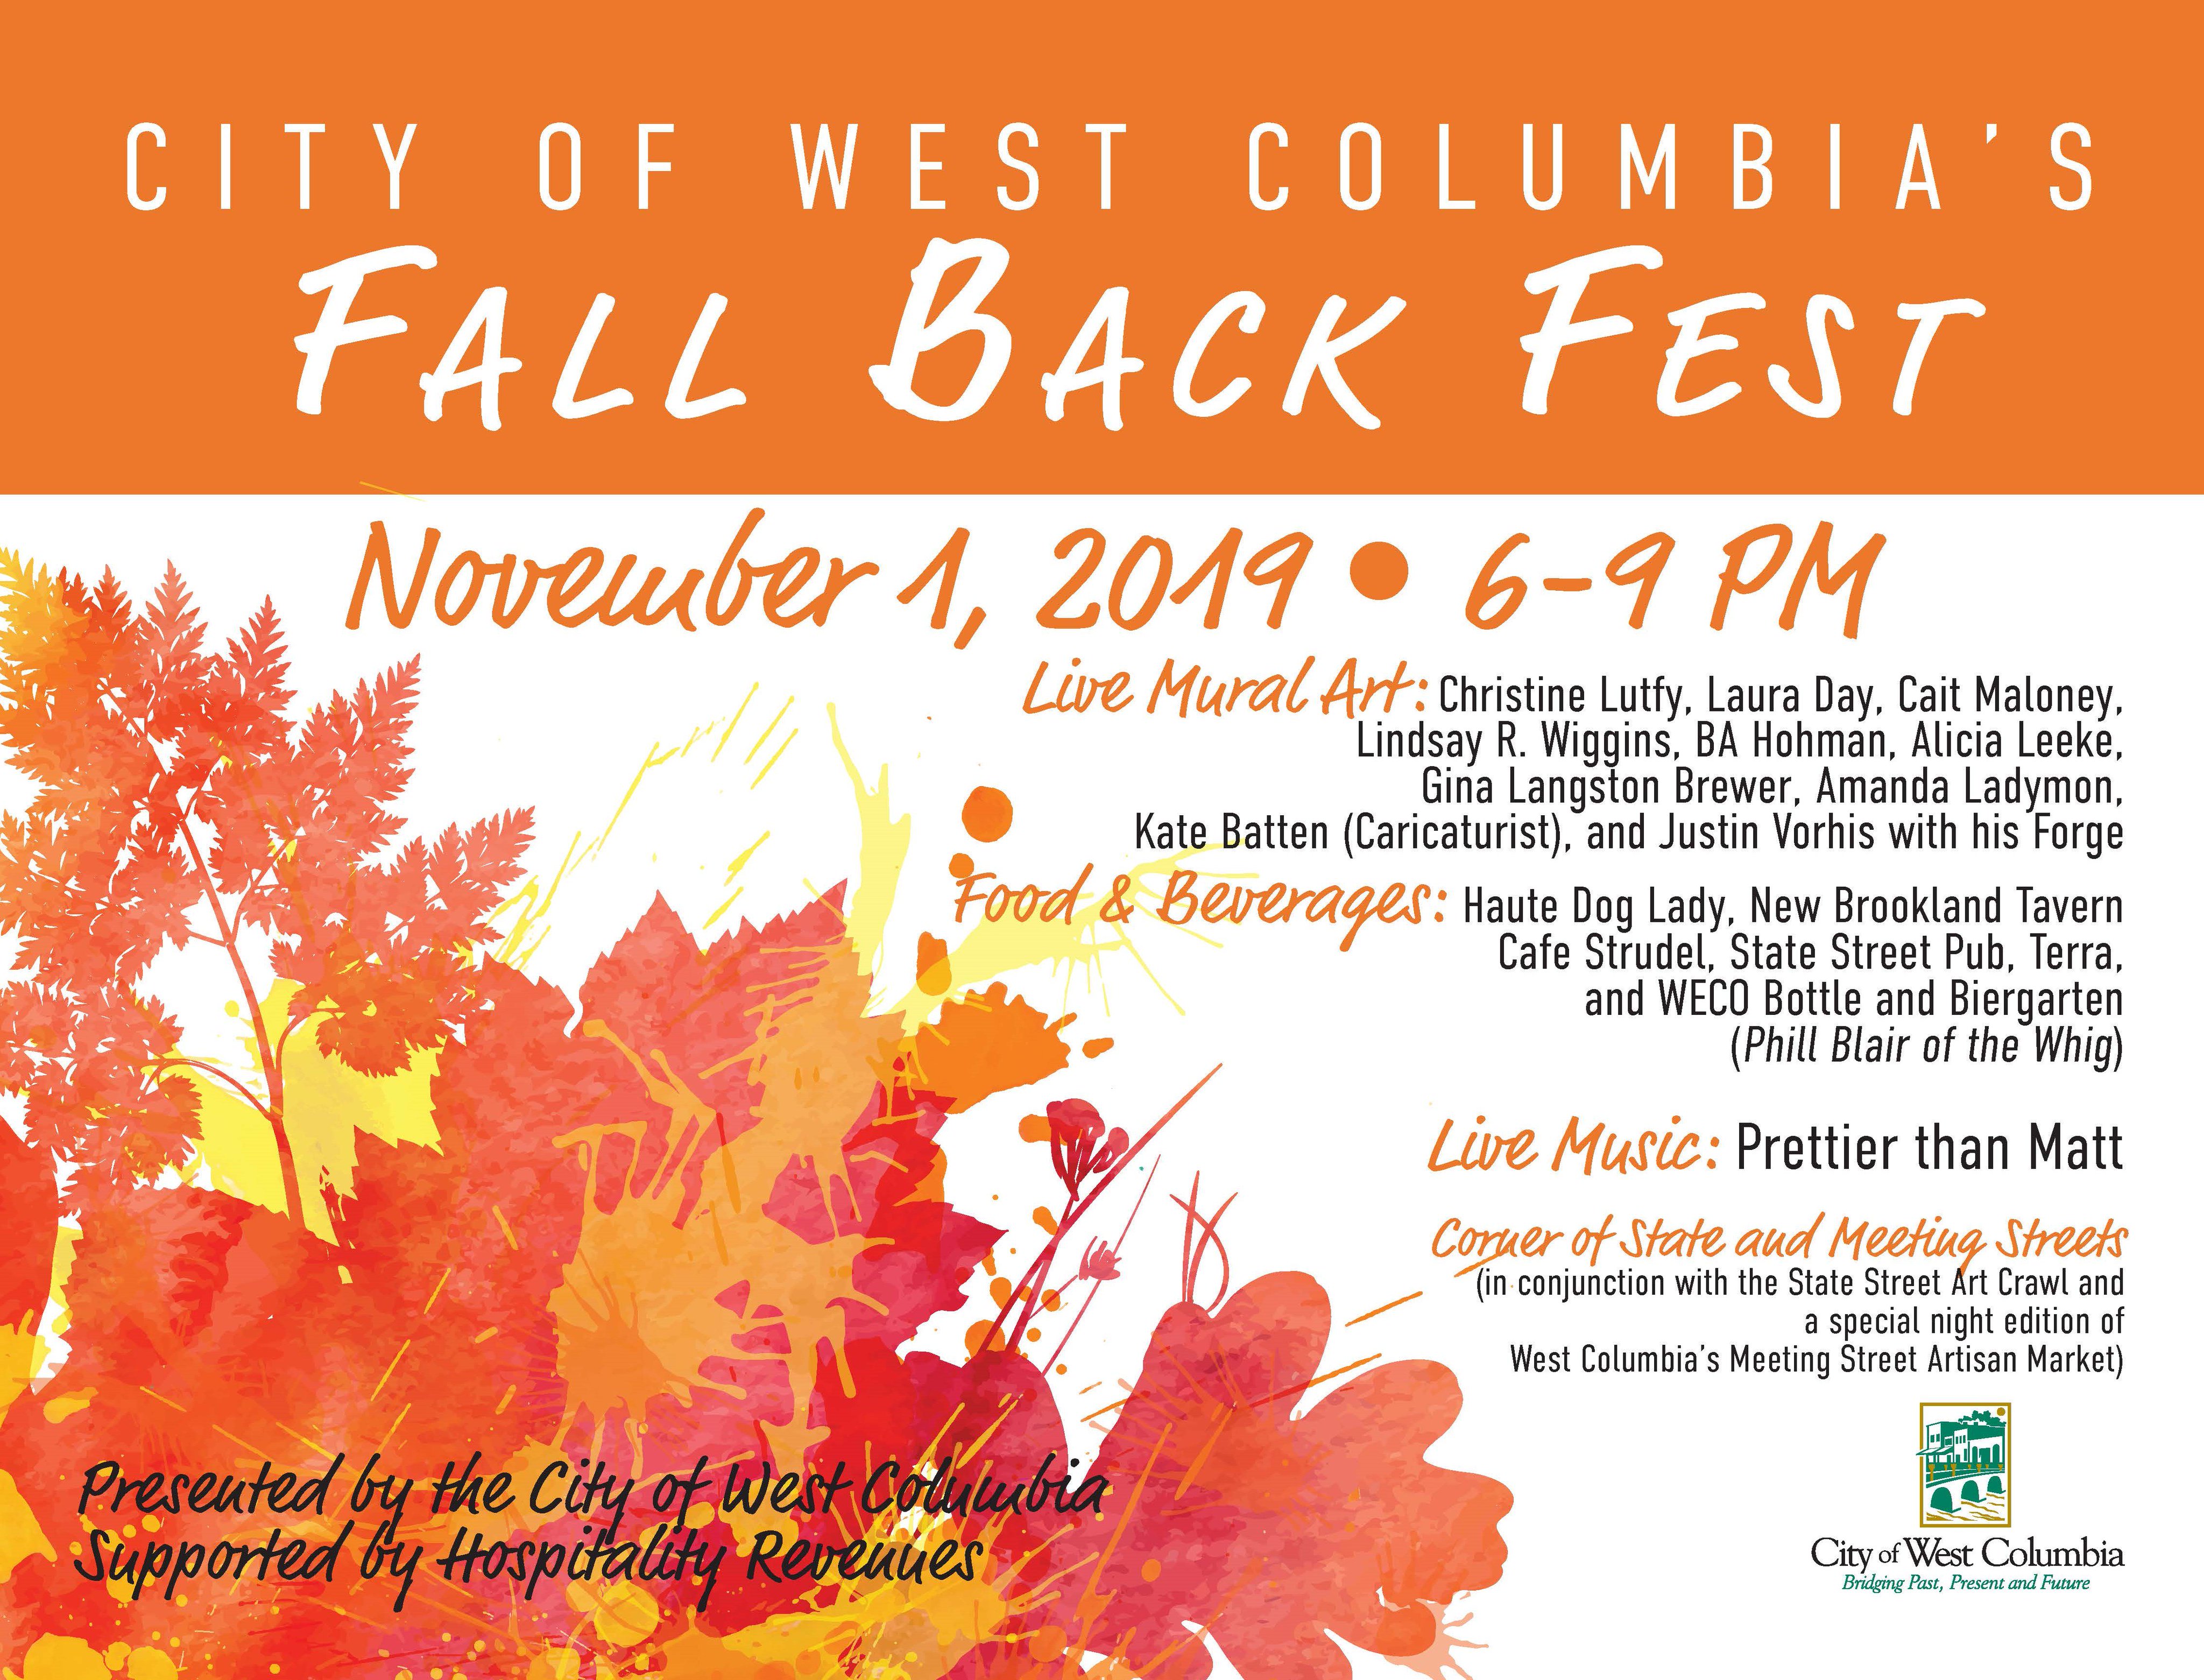 Celebrate the Fall season with the 4th Annual Fall Back Fest this Friday!